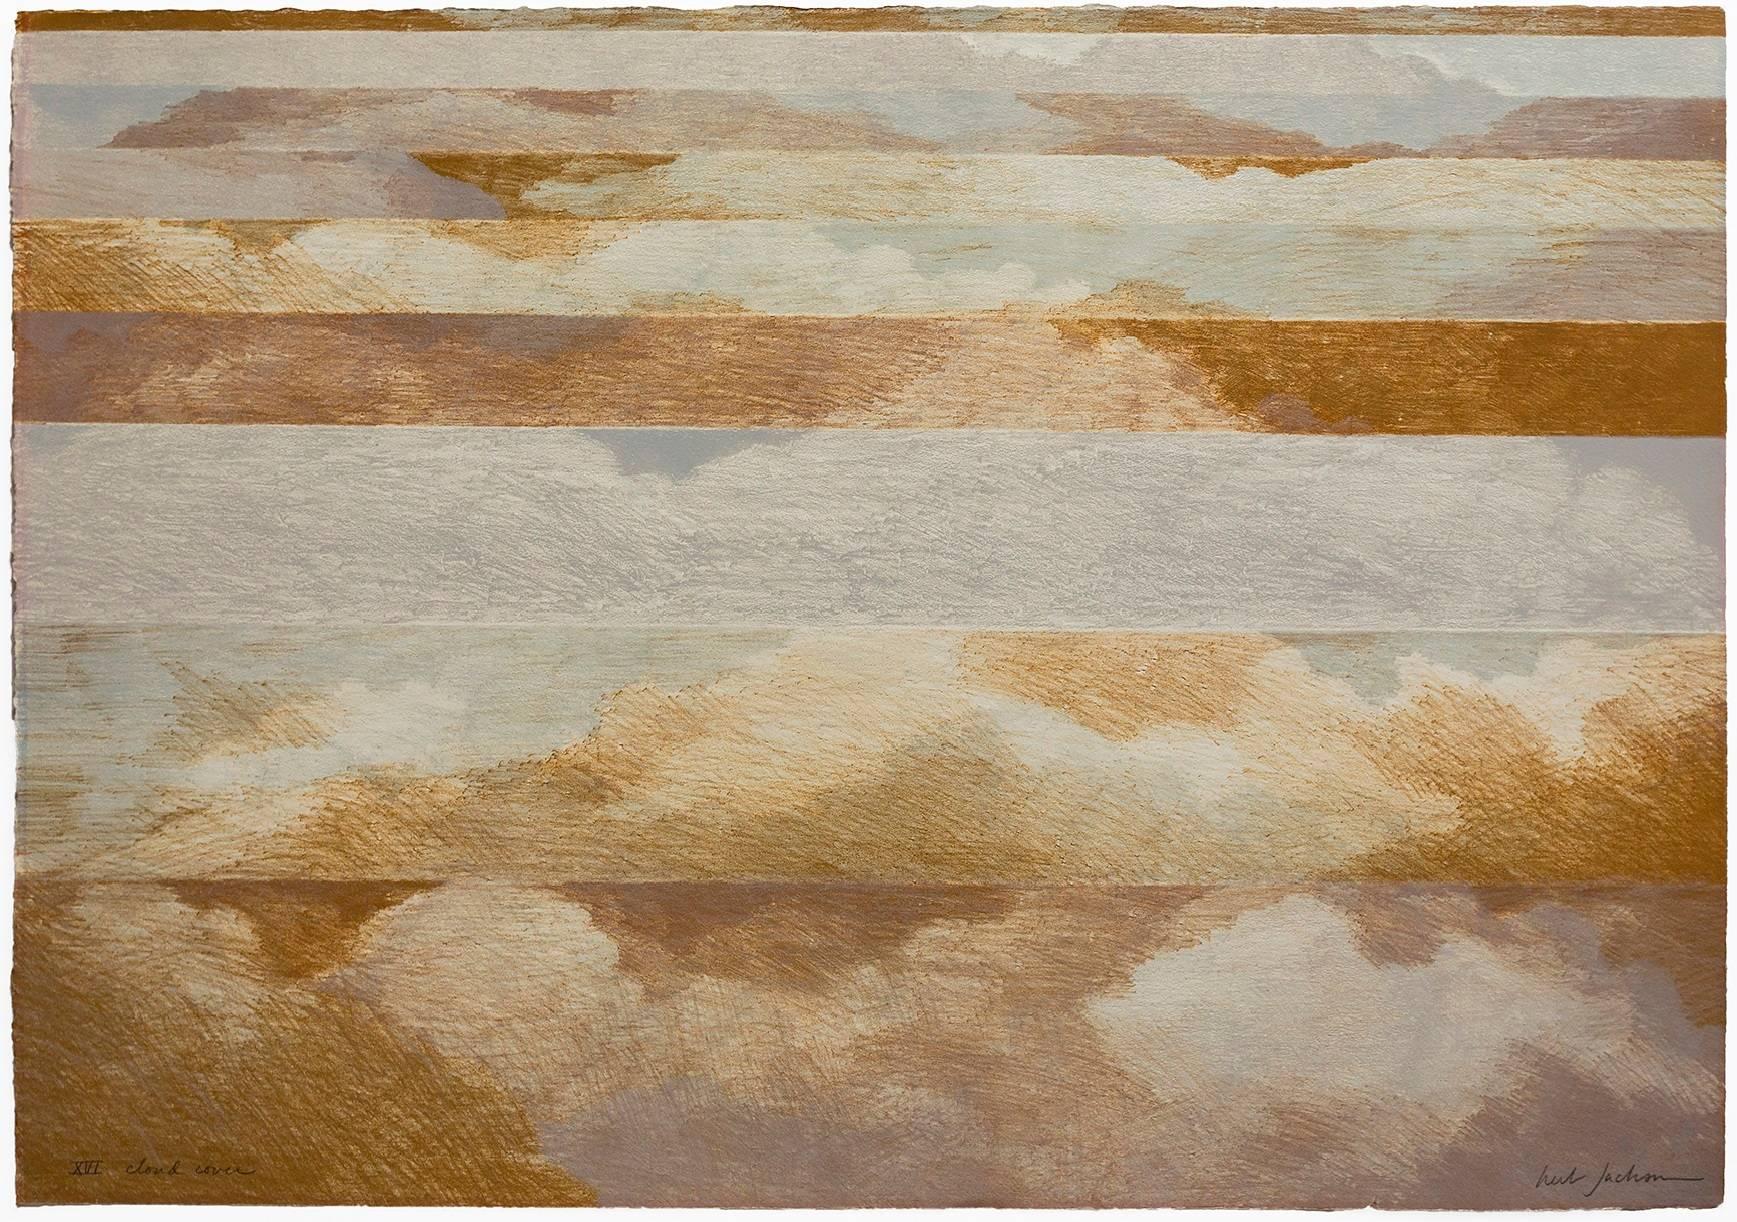 Herb Jackson Landscape Print - Abstract "Cloud Cover" 1972 Lithograph on Arches Paper